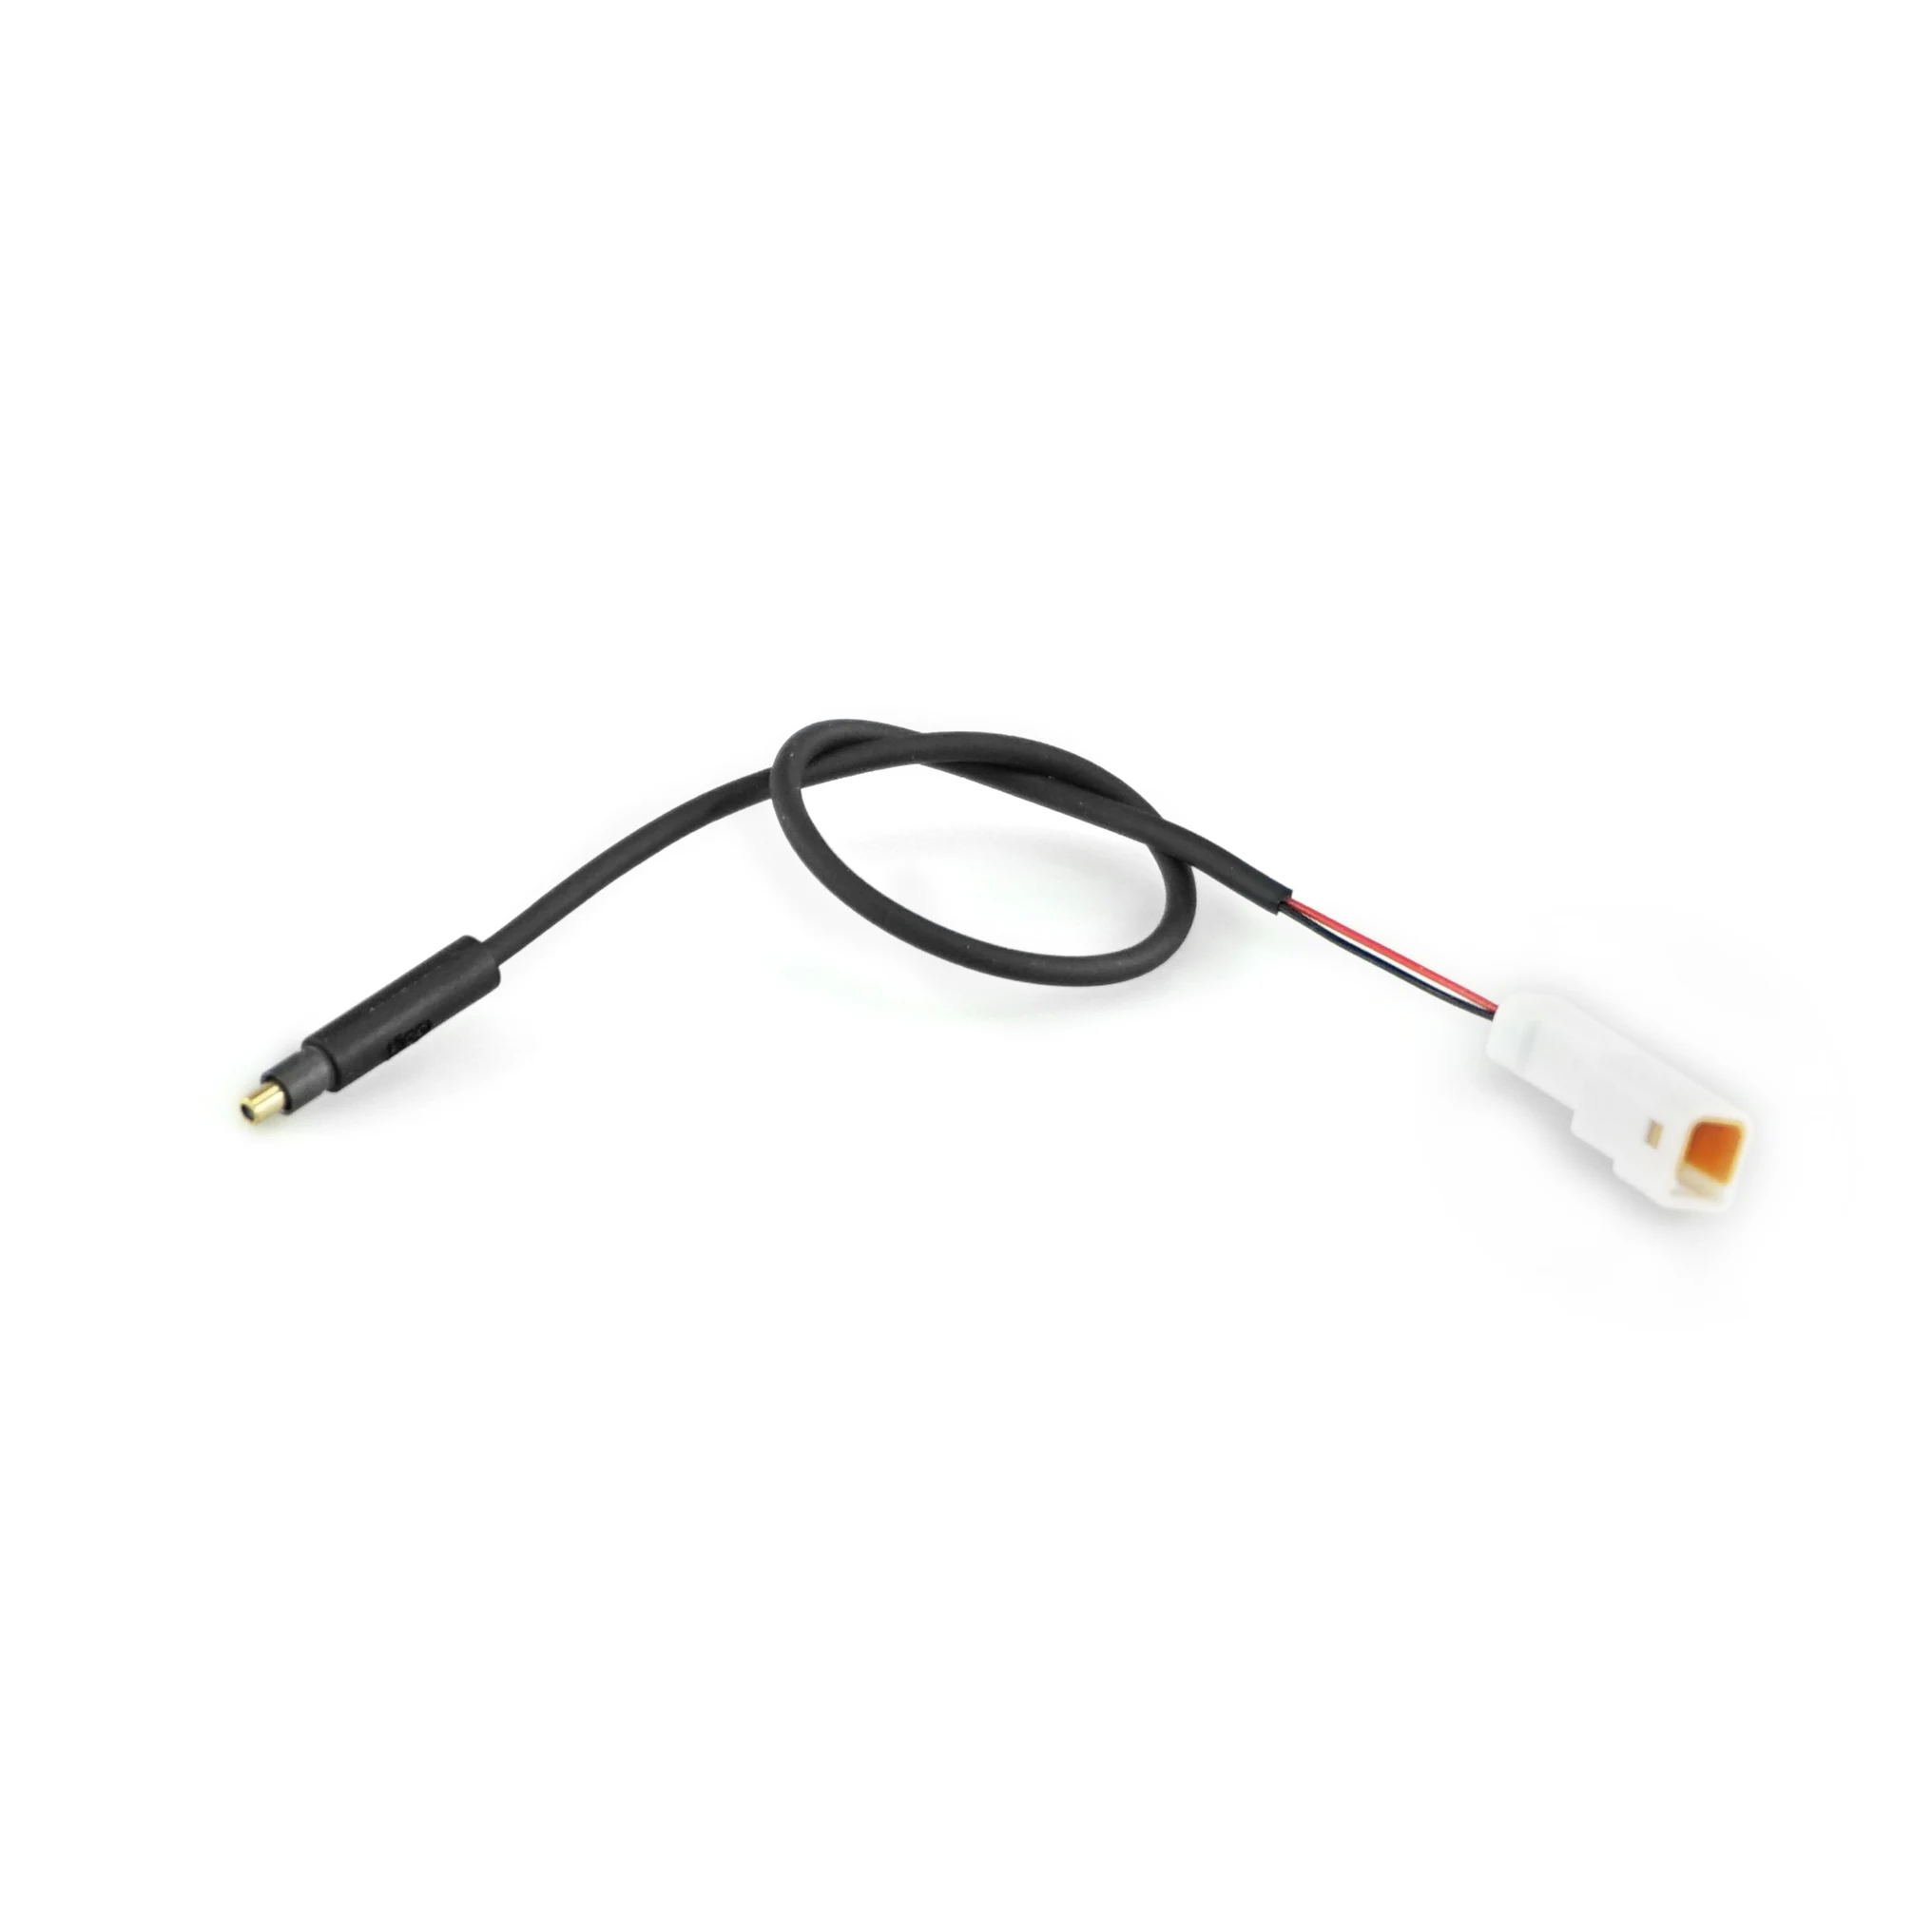 FIT adapter cable for connecting speed sensor to speed node